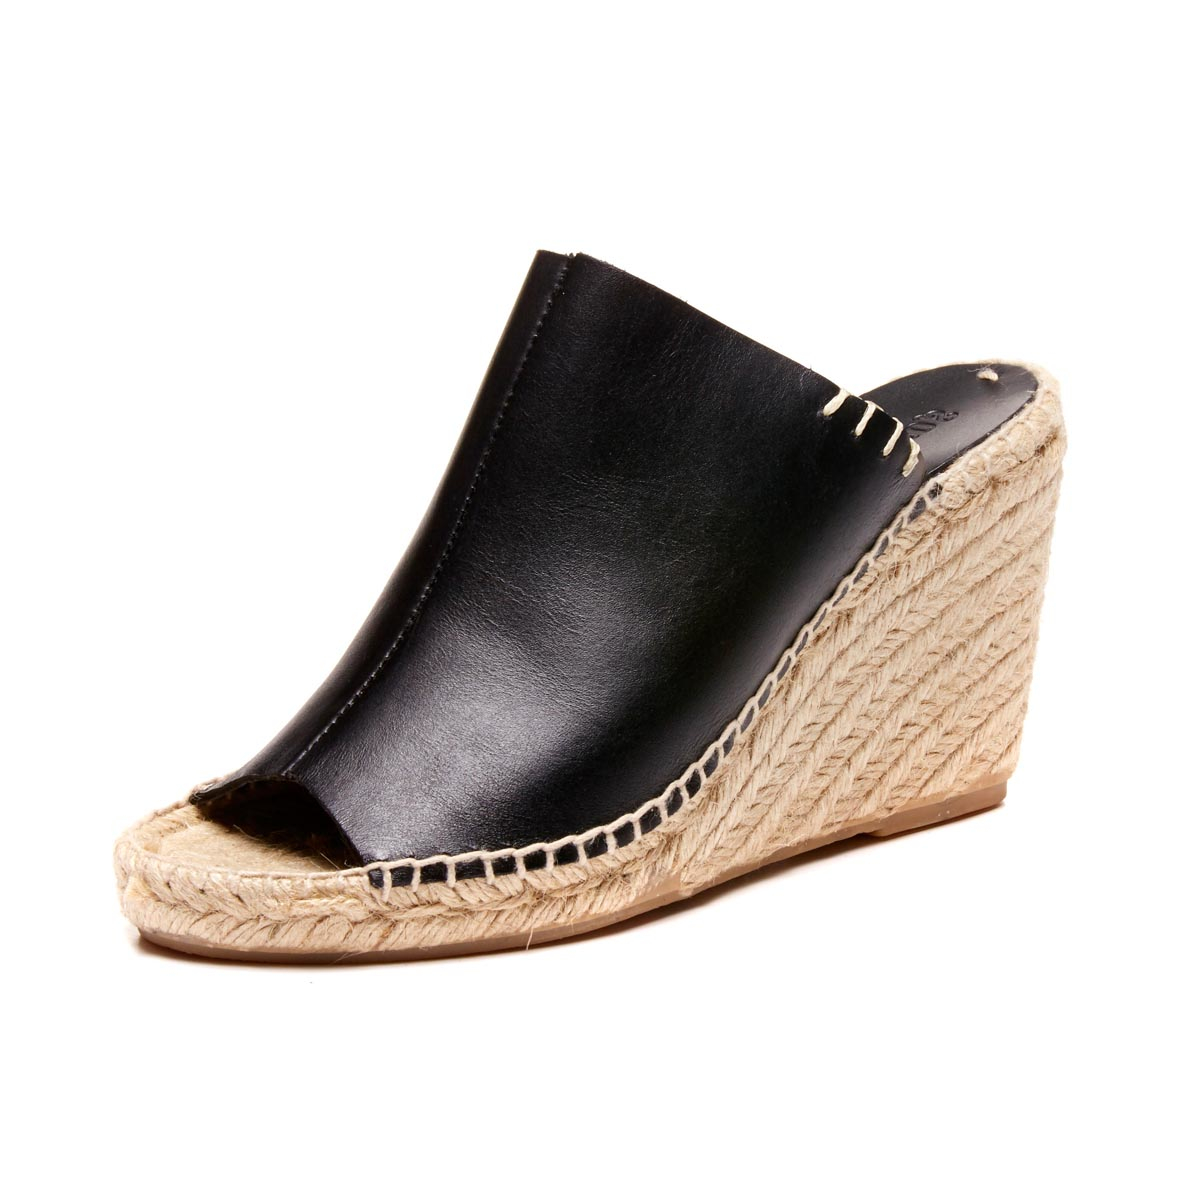 Soludos Leather Mule Wedges in Black - Lyst